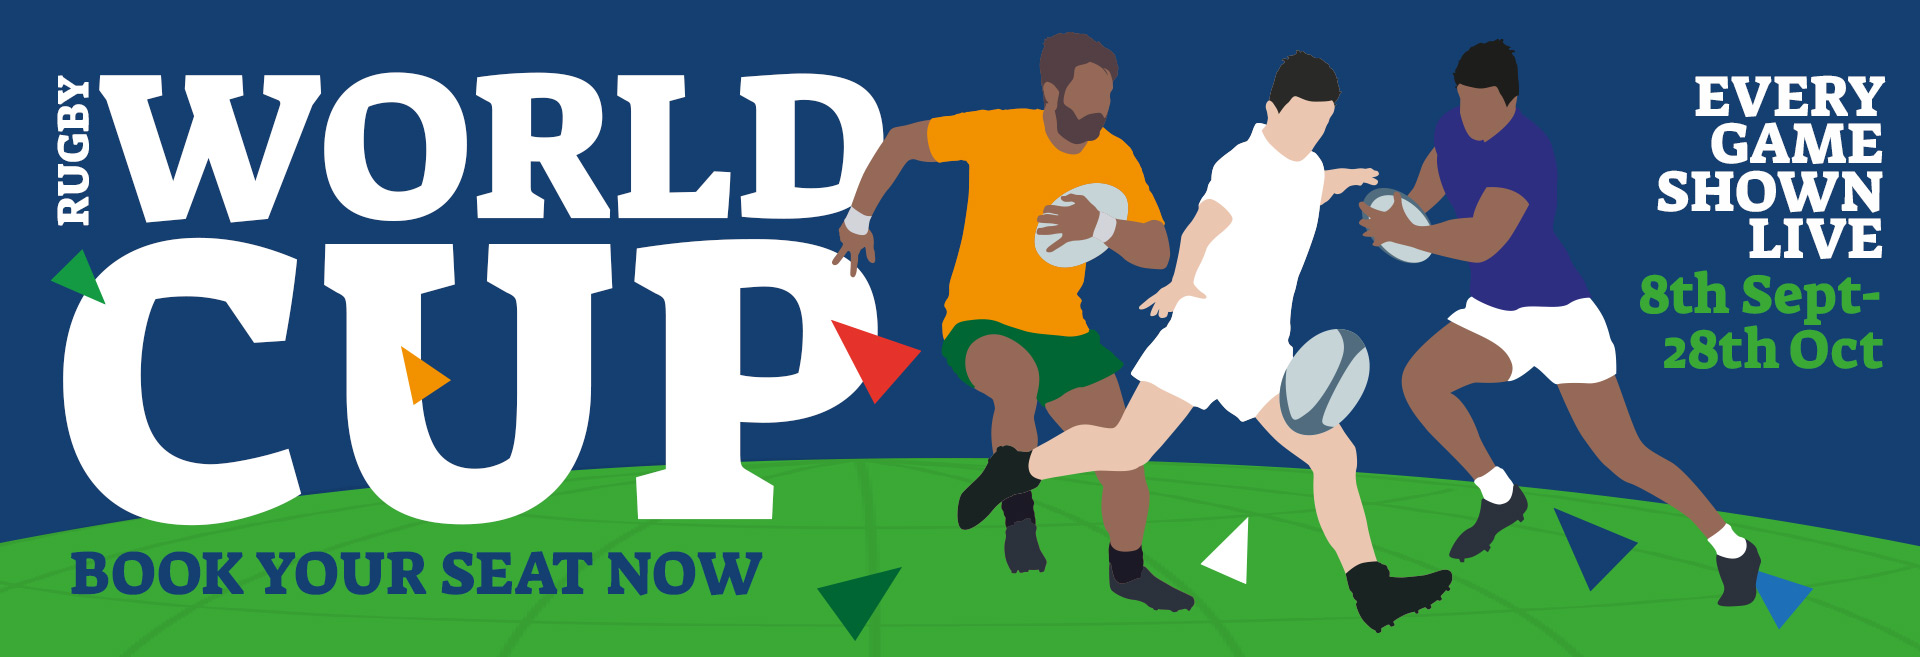 Watch the Rugby World Cup at The Eagle